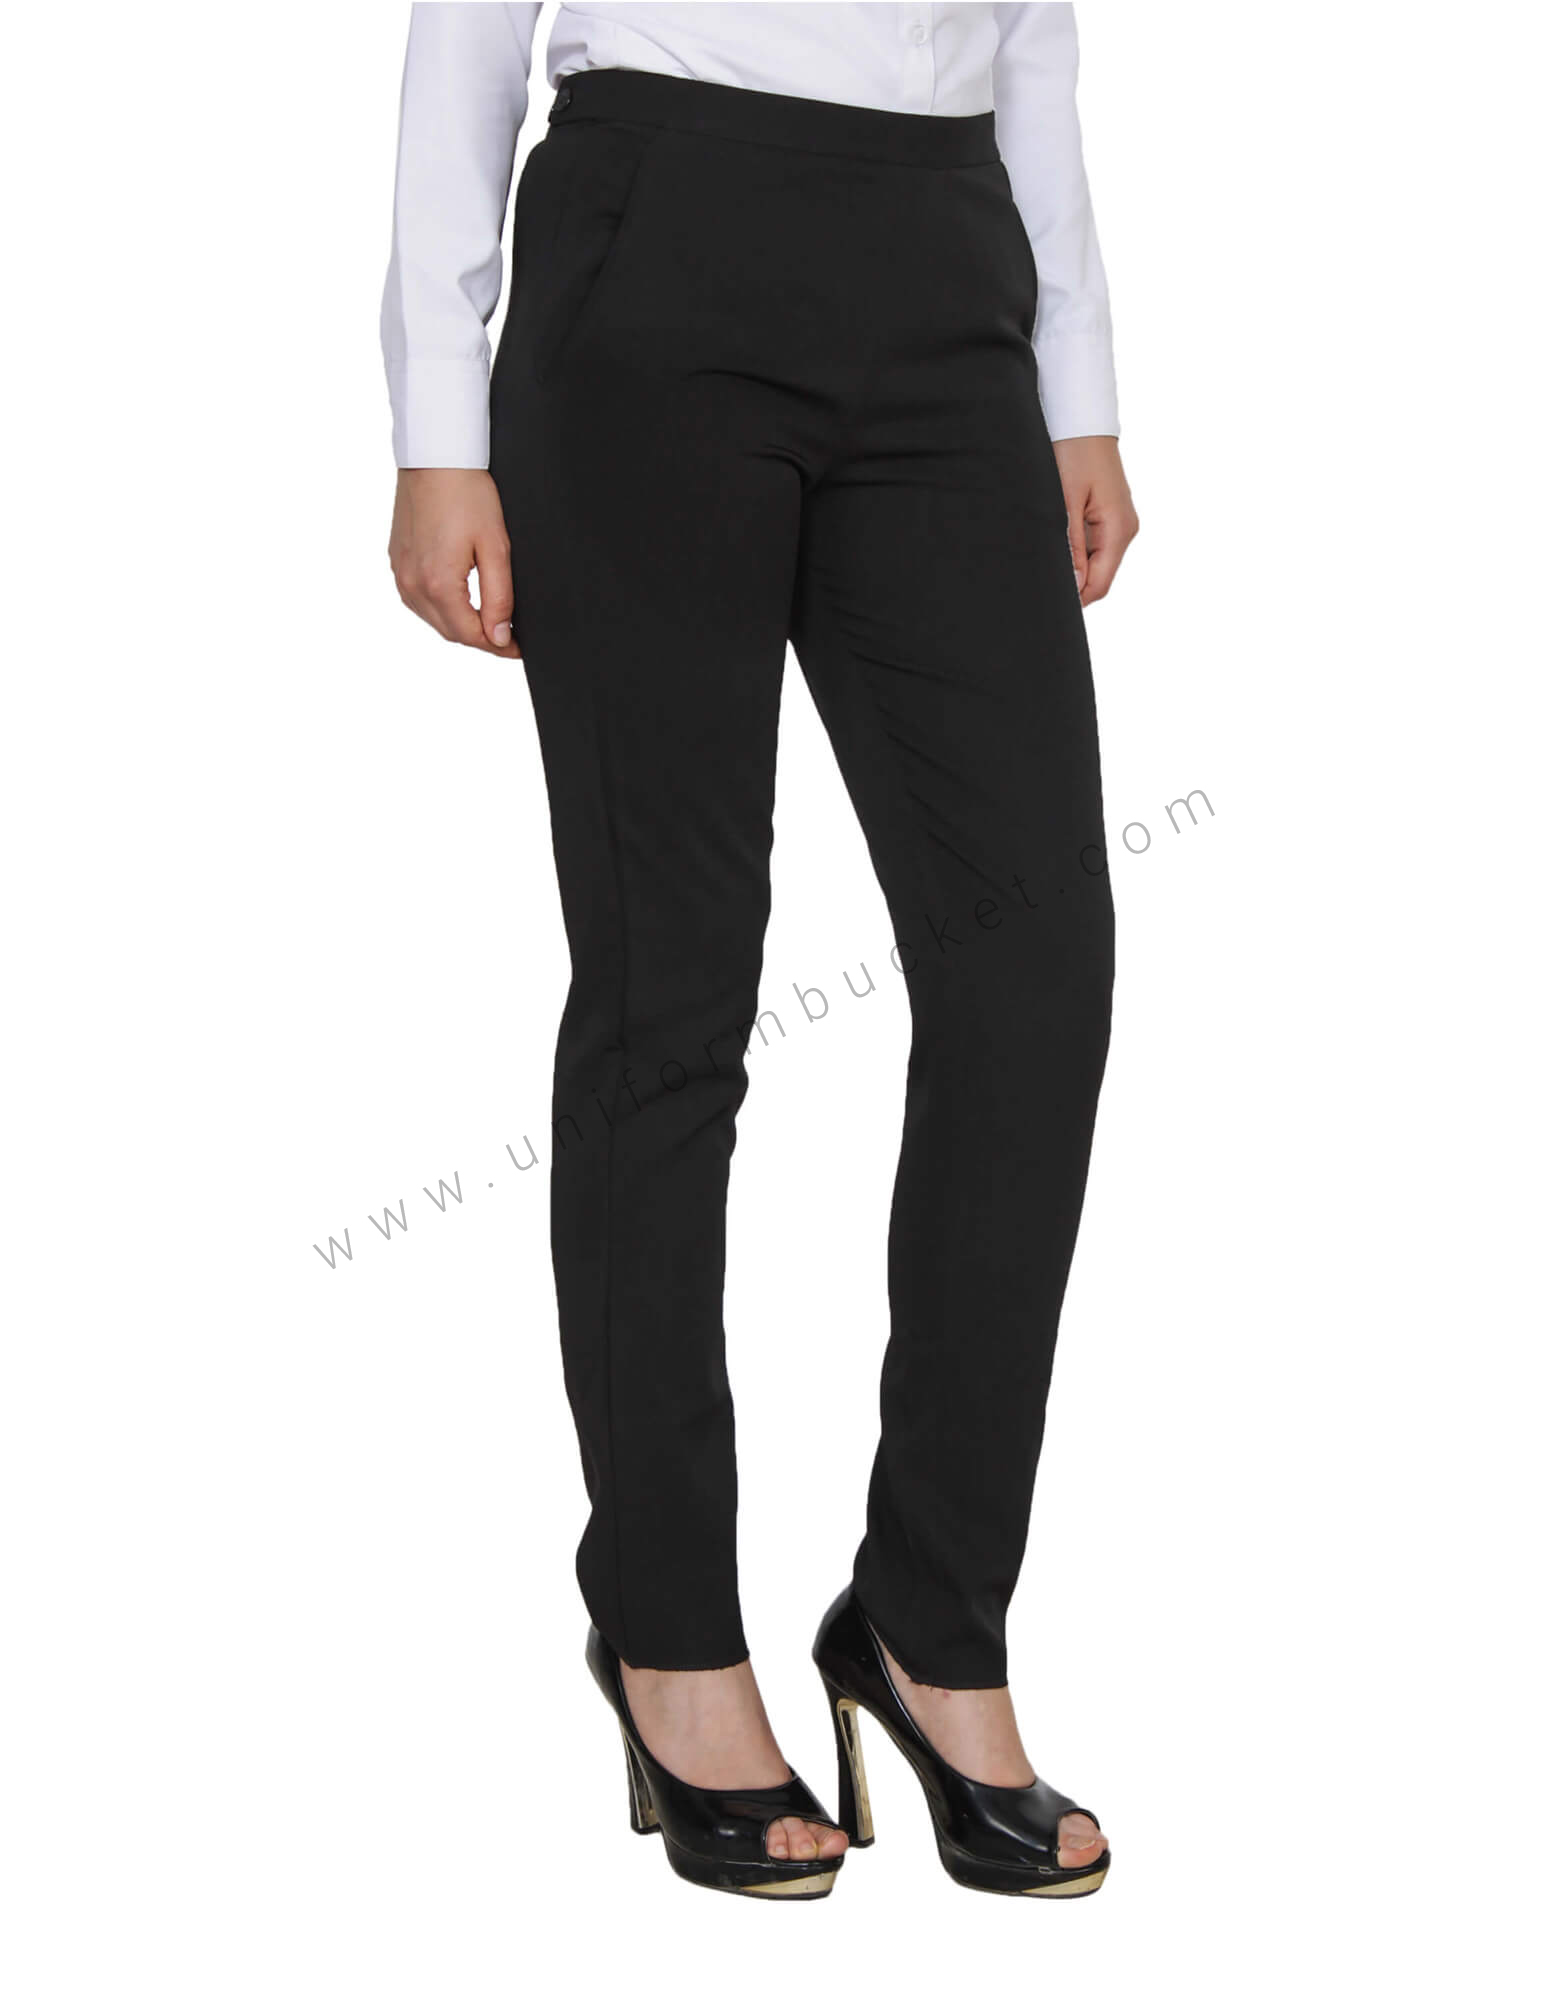 Women Rare Trousers  Buy Women Rare Trousers online in India